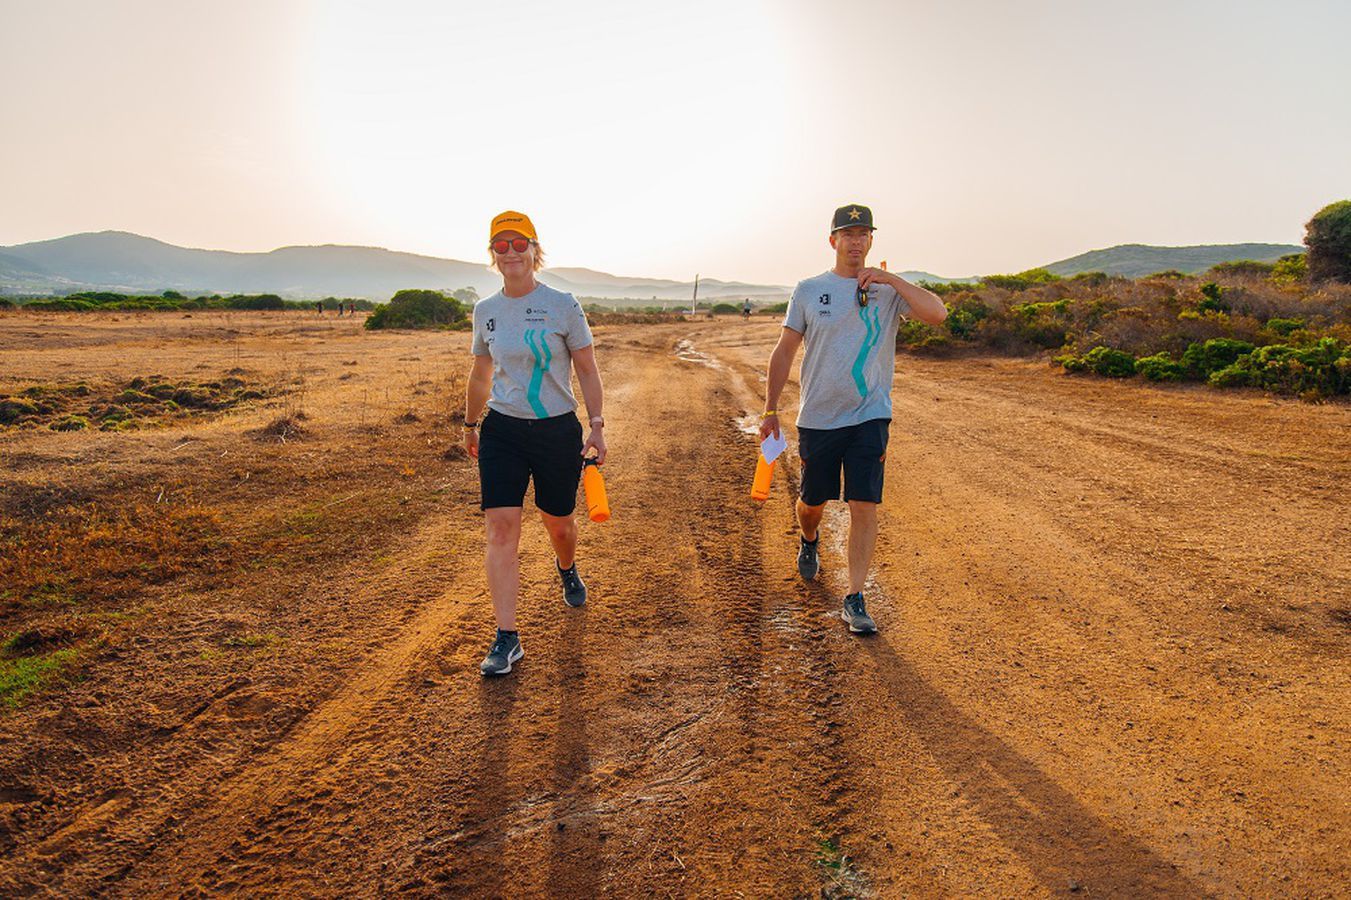 Tanner Foust and Emma Gilmour walking the track in Sardinia before Rounds 2 and 3